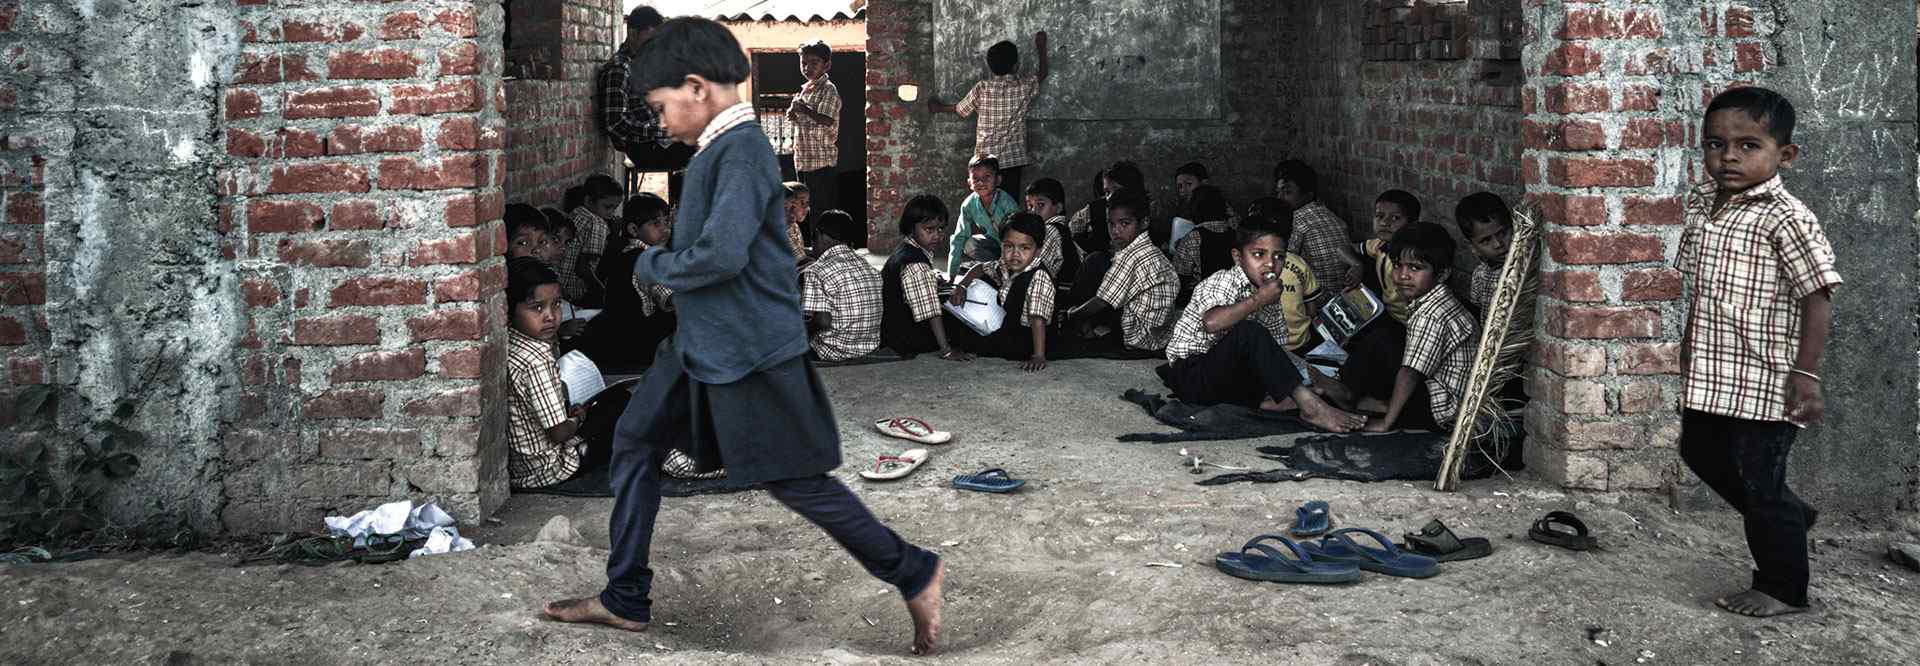 A boy leading a group of children